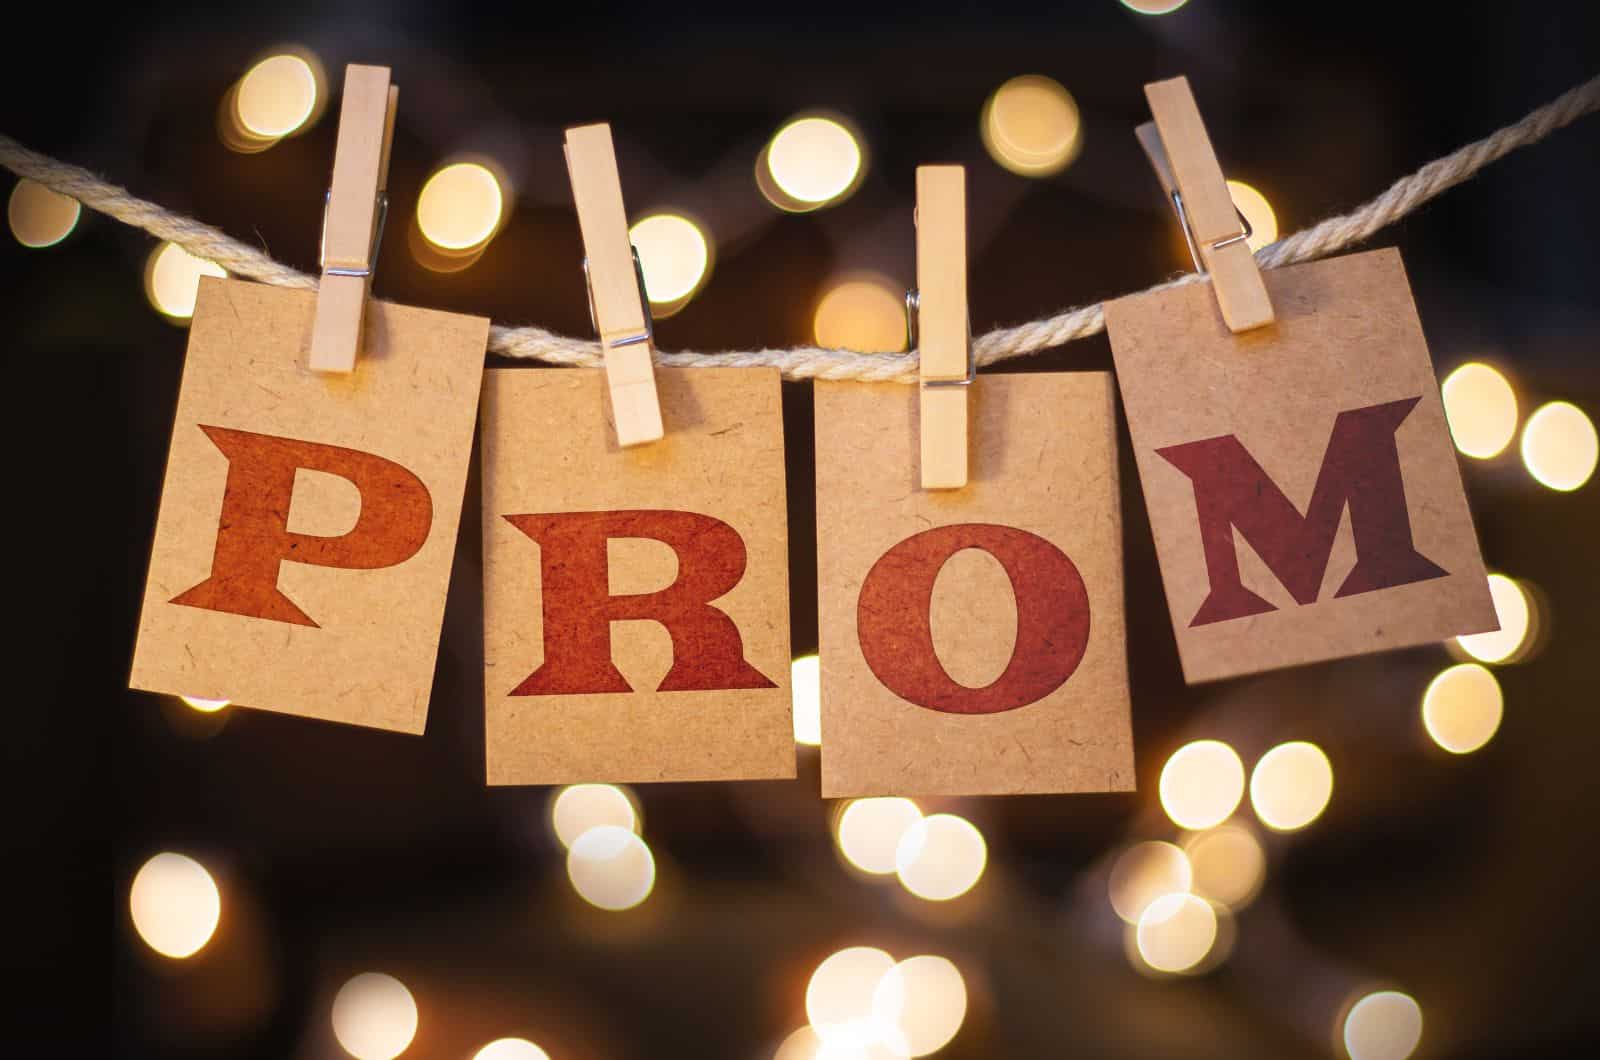 prom sign with fairy lights in background